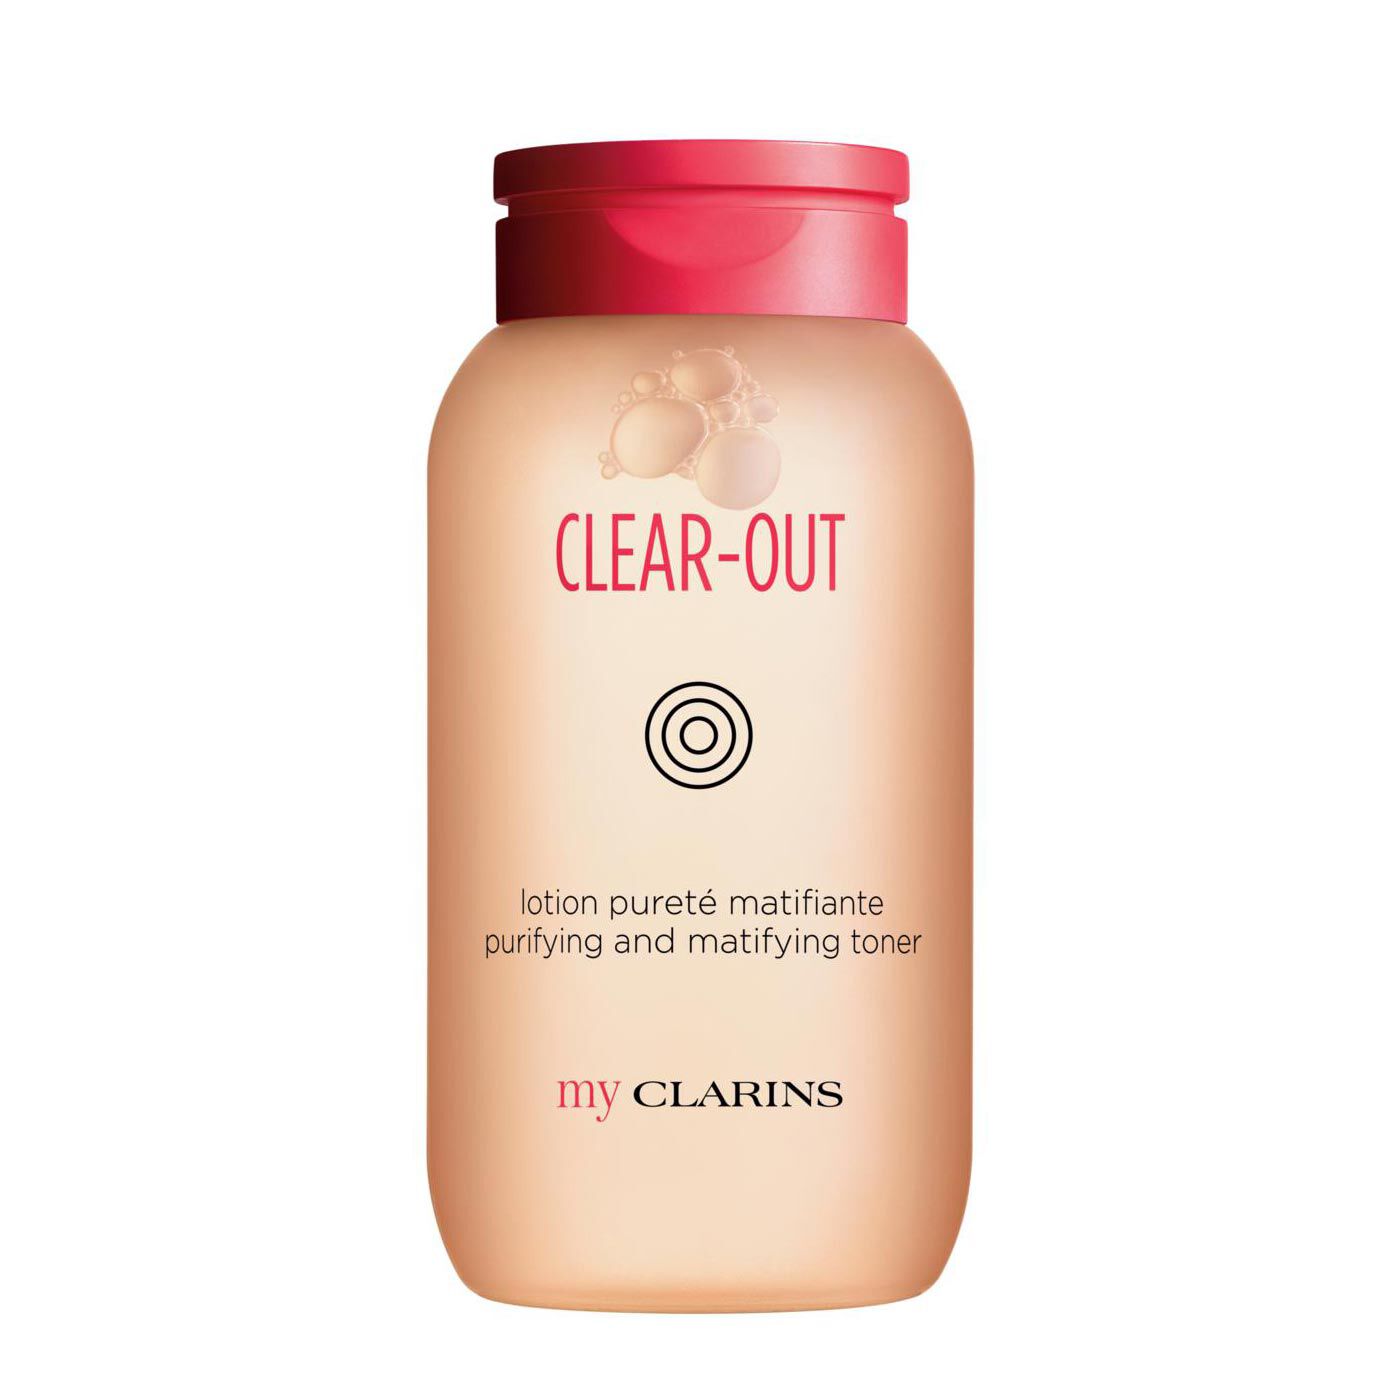 Clarins: Beauty Products, Cosmetics, Makeup, Body Care - Clarins